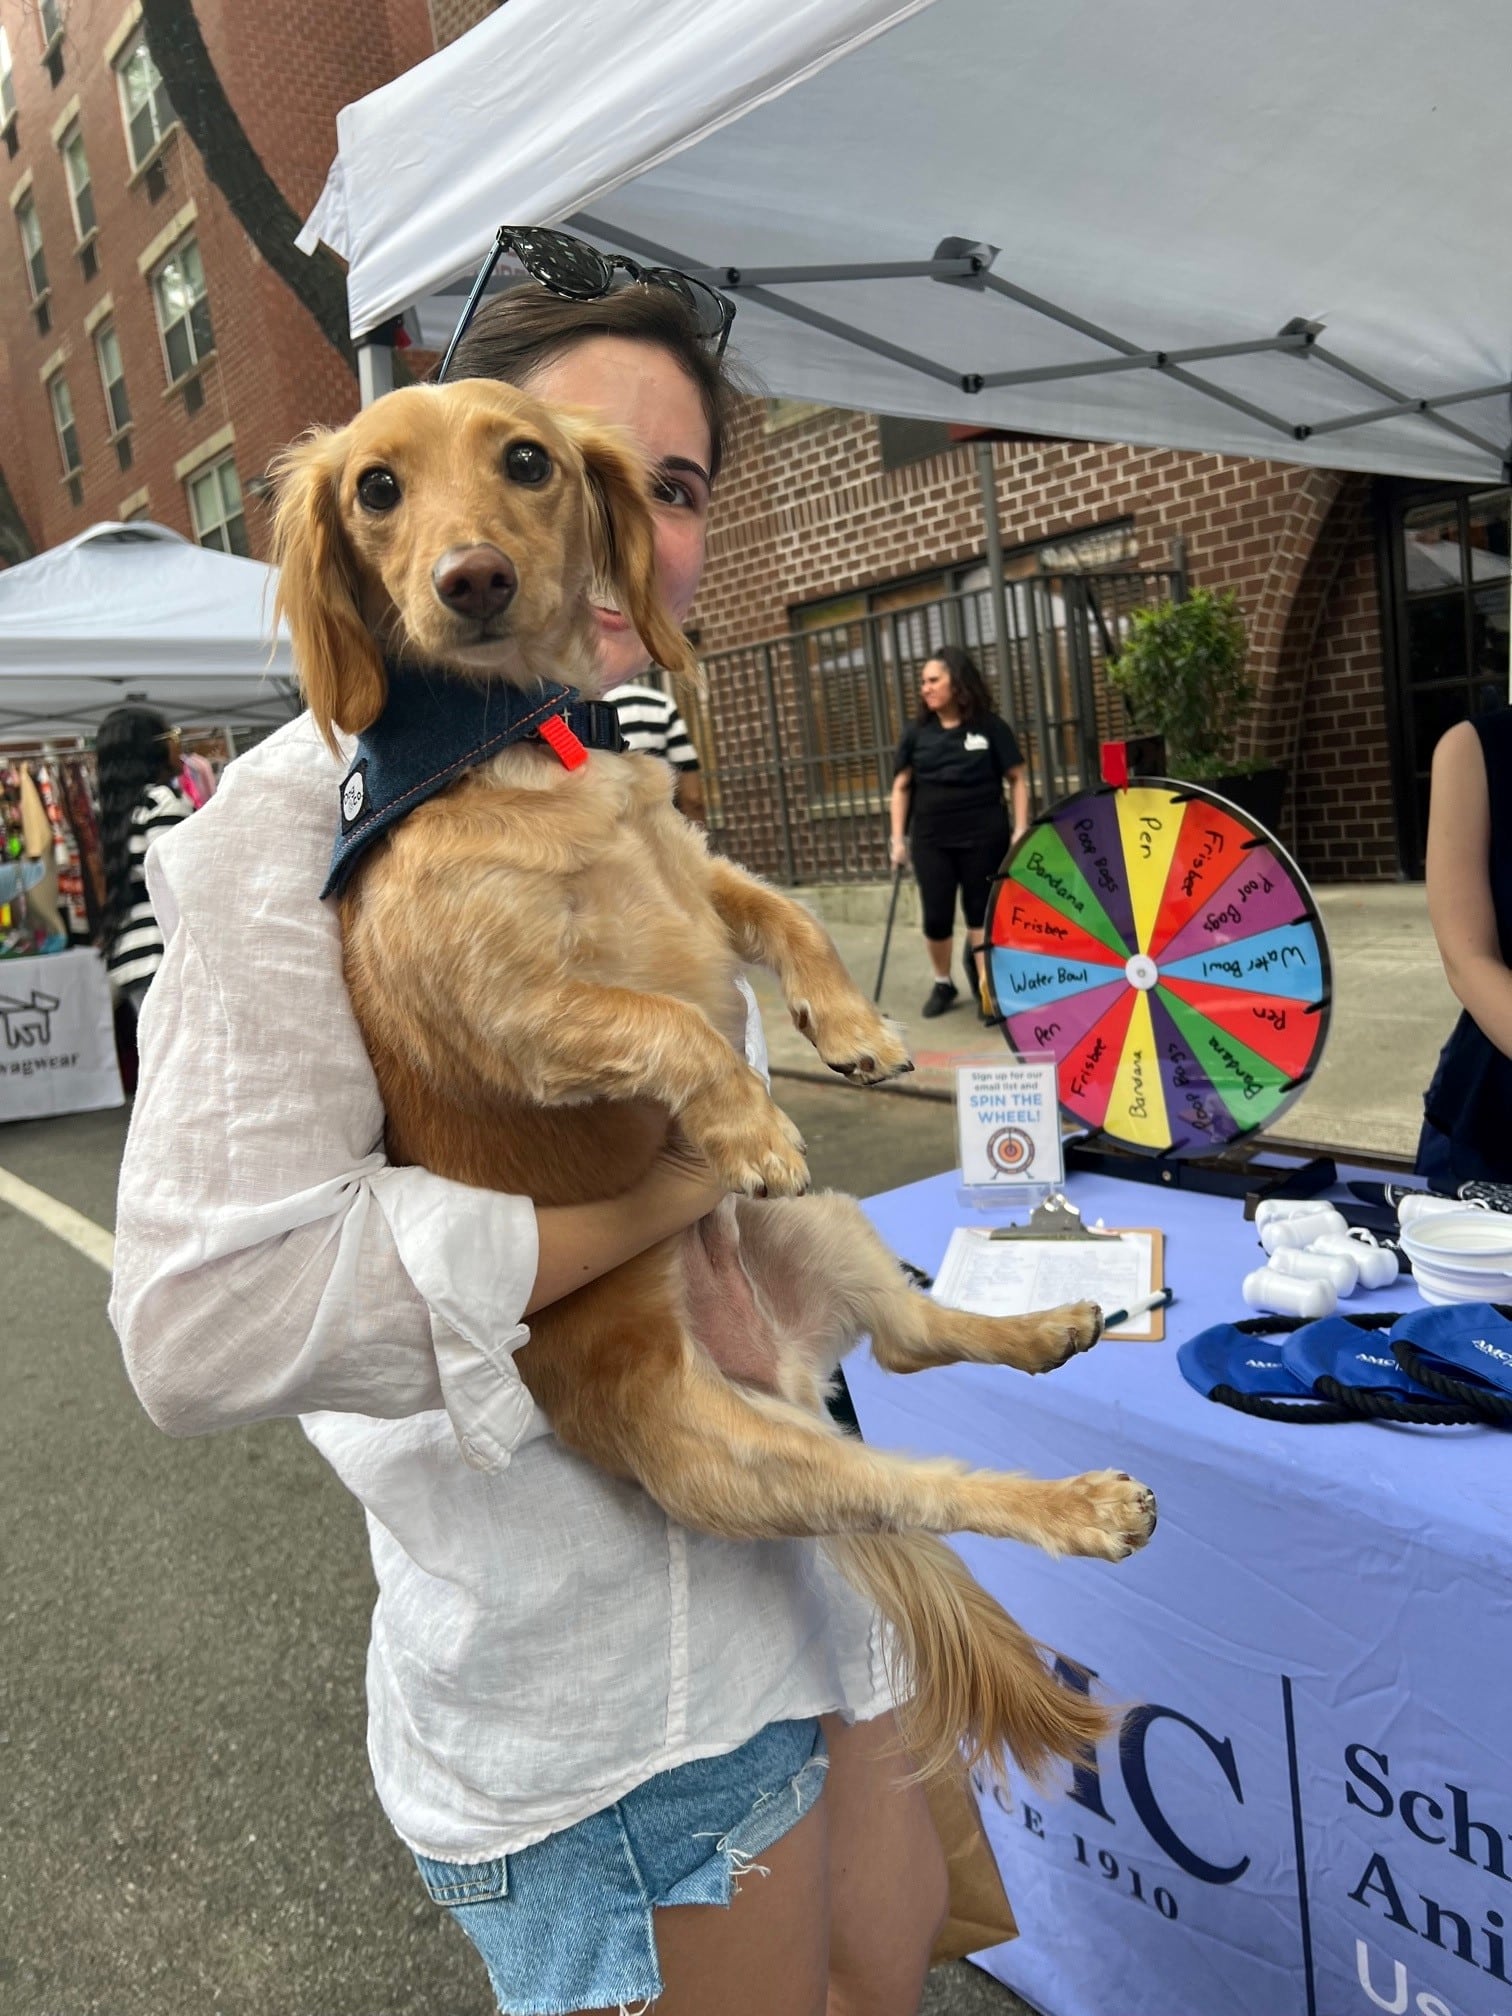 Owner holding up her dog at Muddy Paws Block Party.